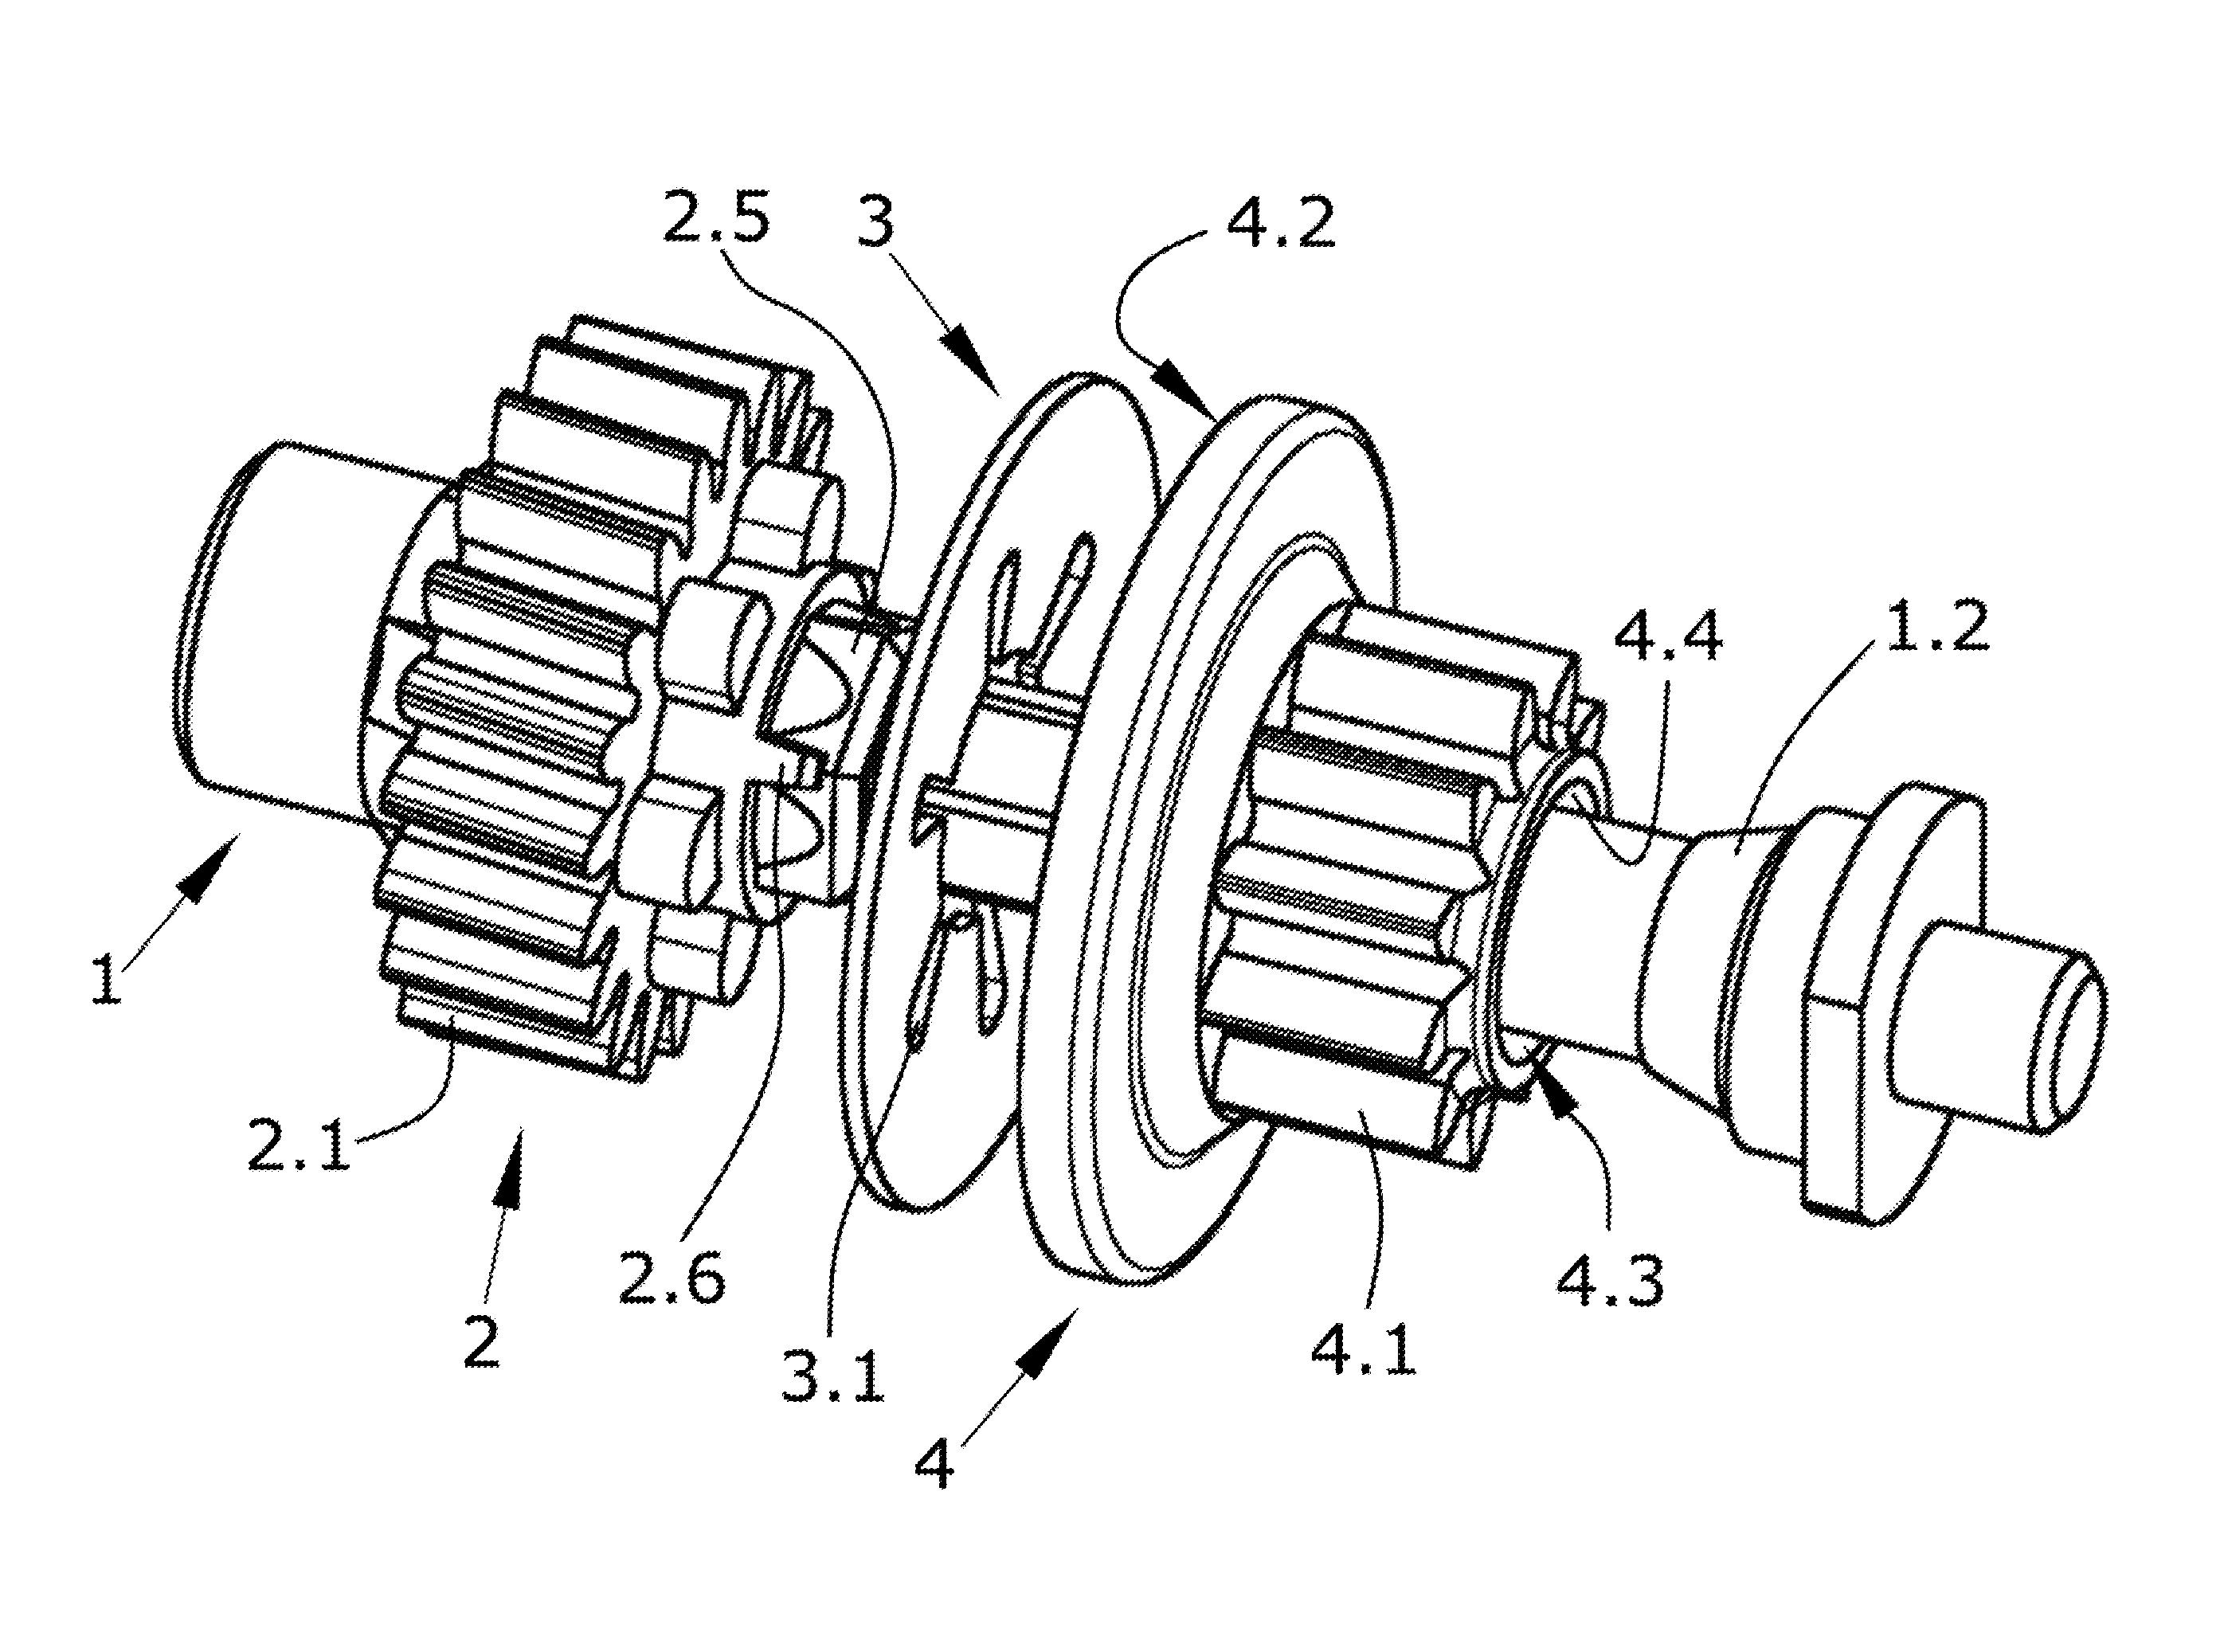 Clutch suitable for vehicles' powered mirrors